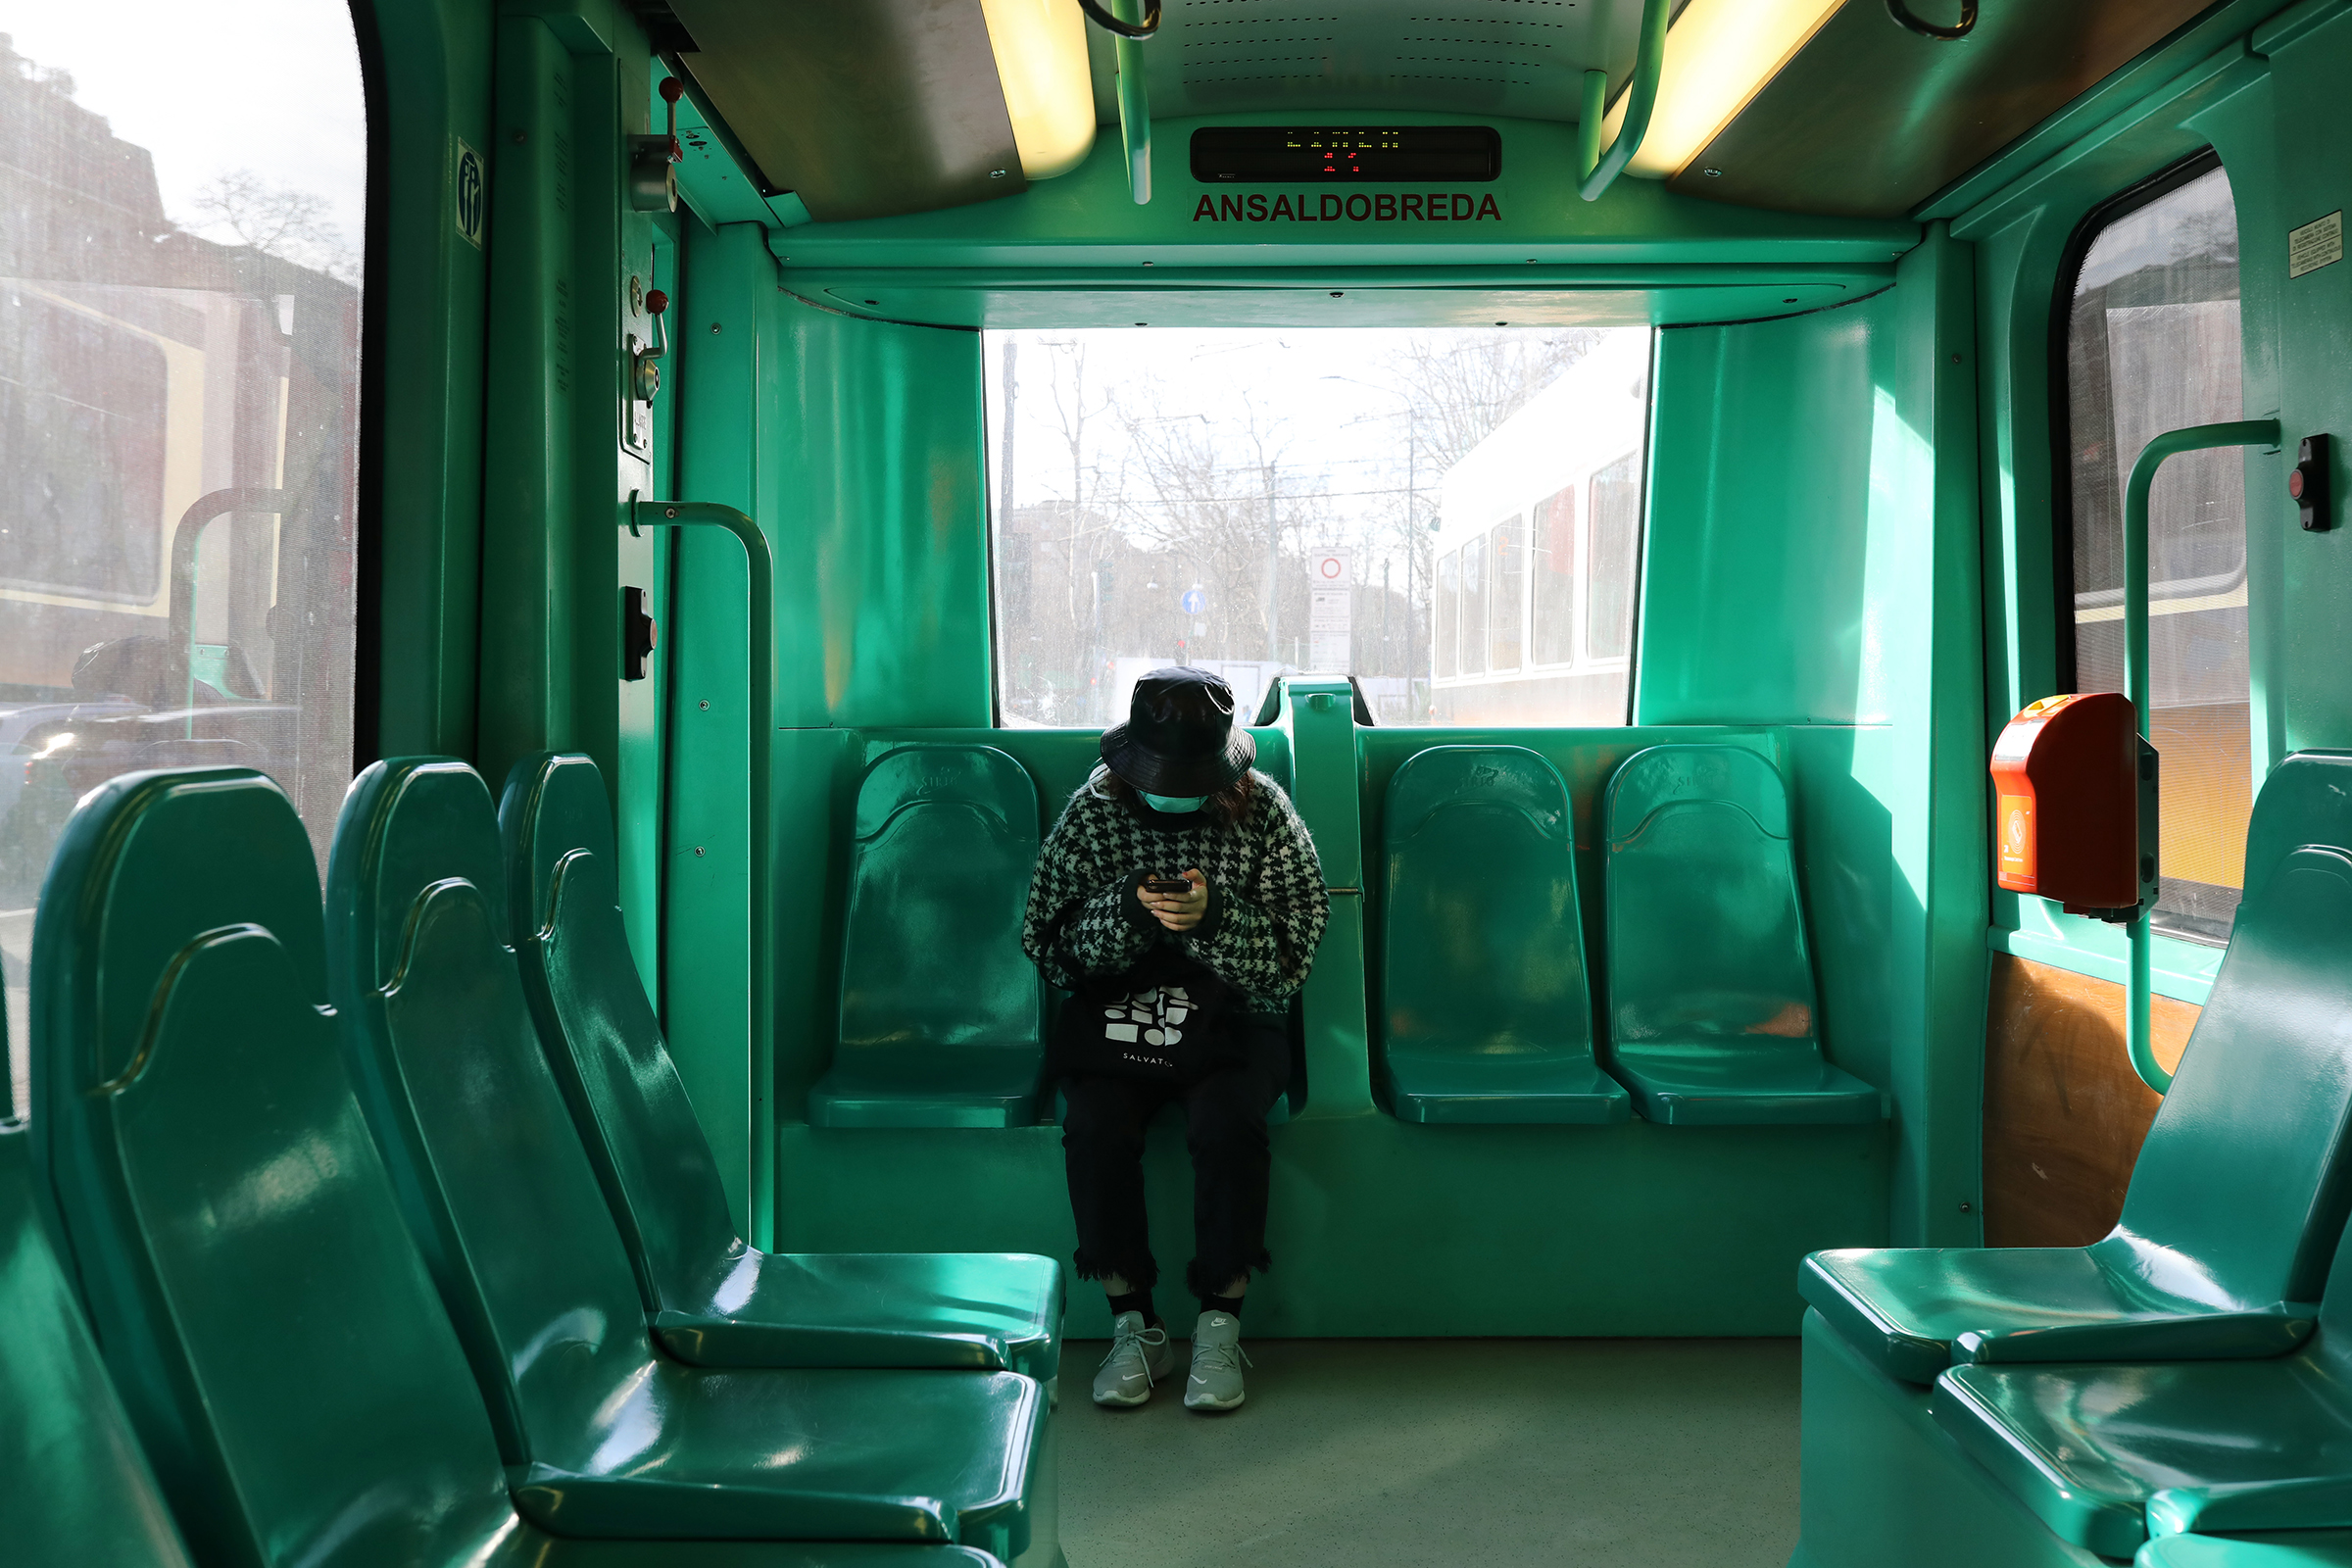 A woman wearing a protective mask is seen in the public transportation on February 27, 2020 in Milan, Italy. Italy registered a 25% surge in coronavirus cases in 24 hours, with infections remaining centered on outbreaks in two northern regions, Lombardy and Veneto. But a few cases have turned up now in southern Italy too. In Italy so far 528 people have been infected and 14 have died, officials say, amid global efforts to stop the virus spreading.